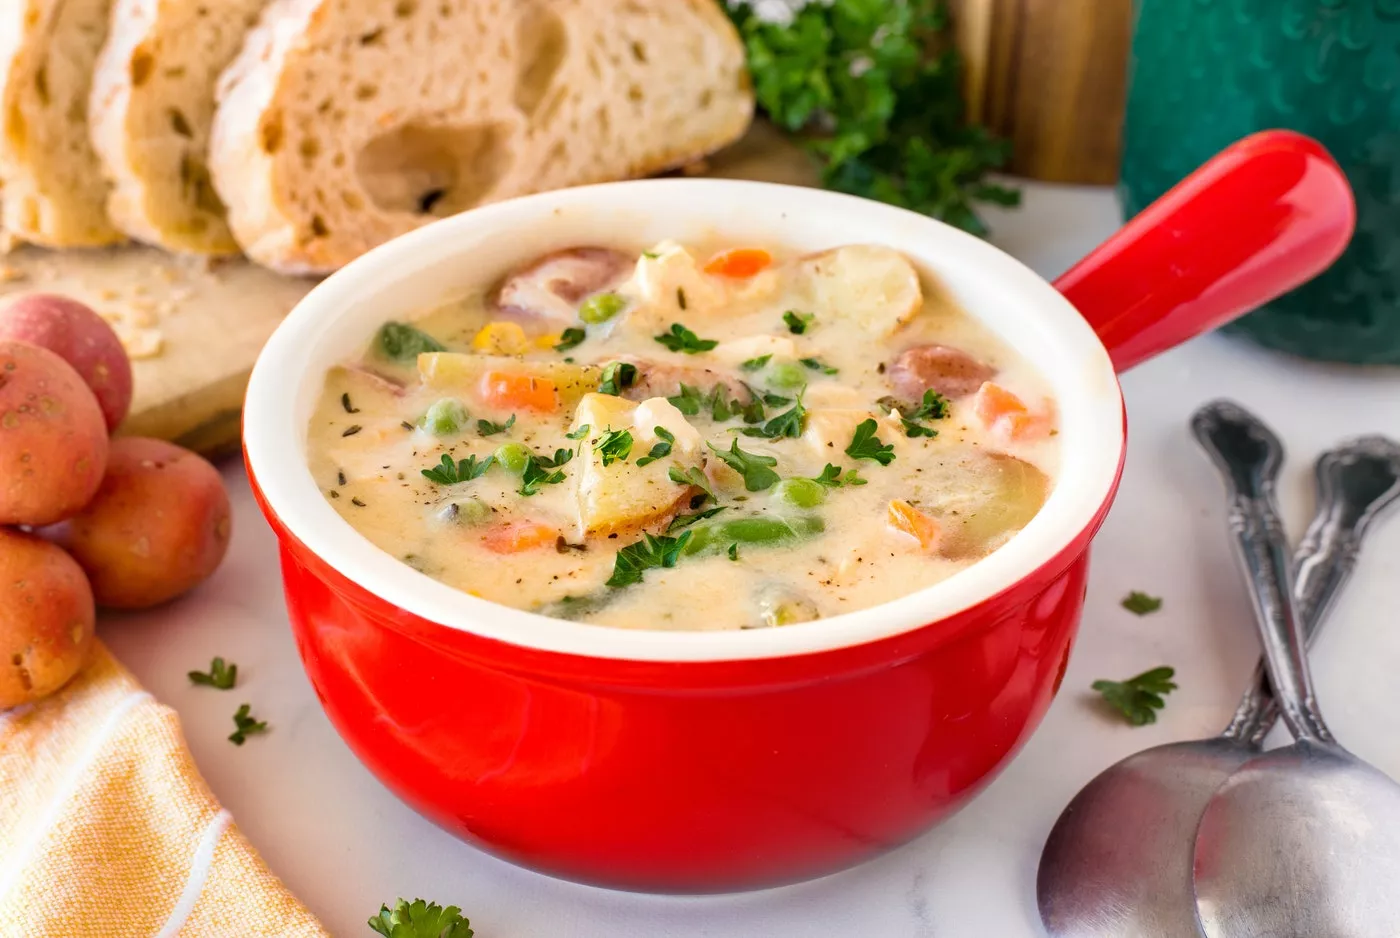 A delicious comfy bowl of chicken and potato soup.